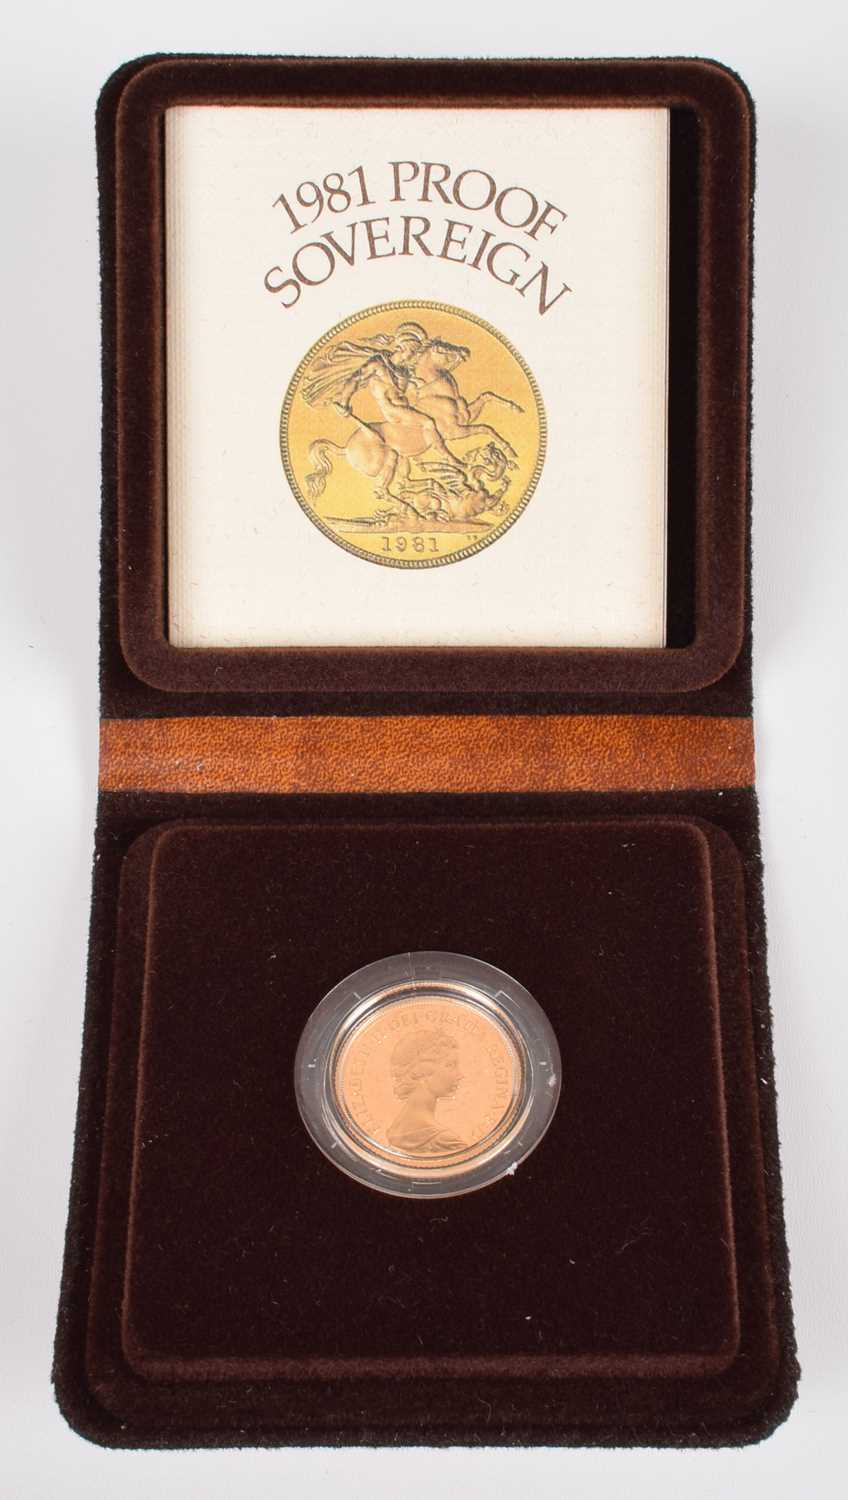 Lot 95 - 1981 Royal Mint, Proof Sovereign.